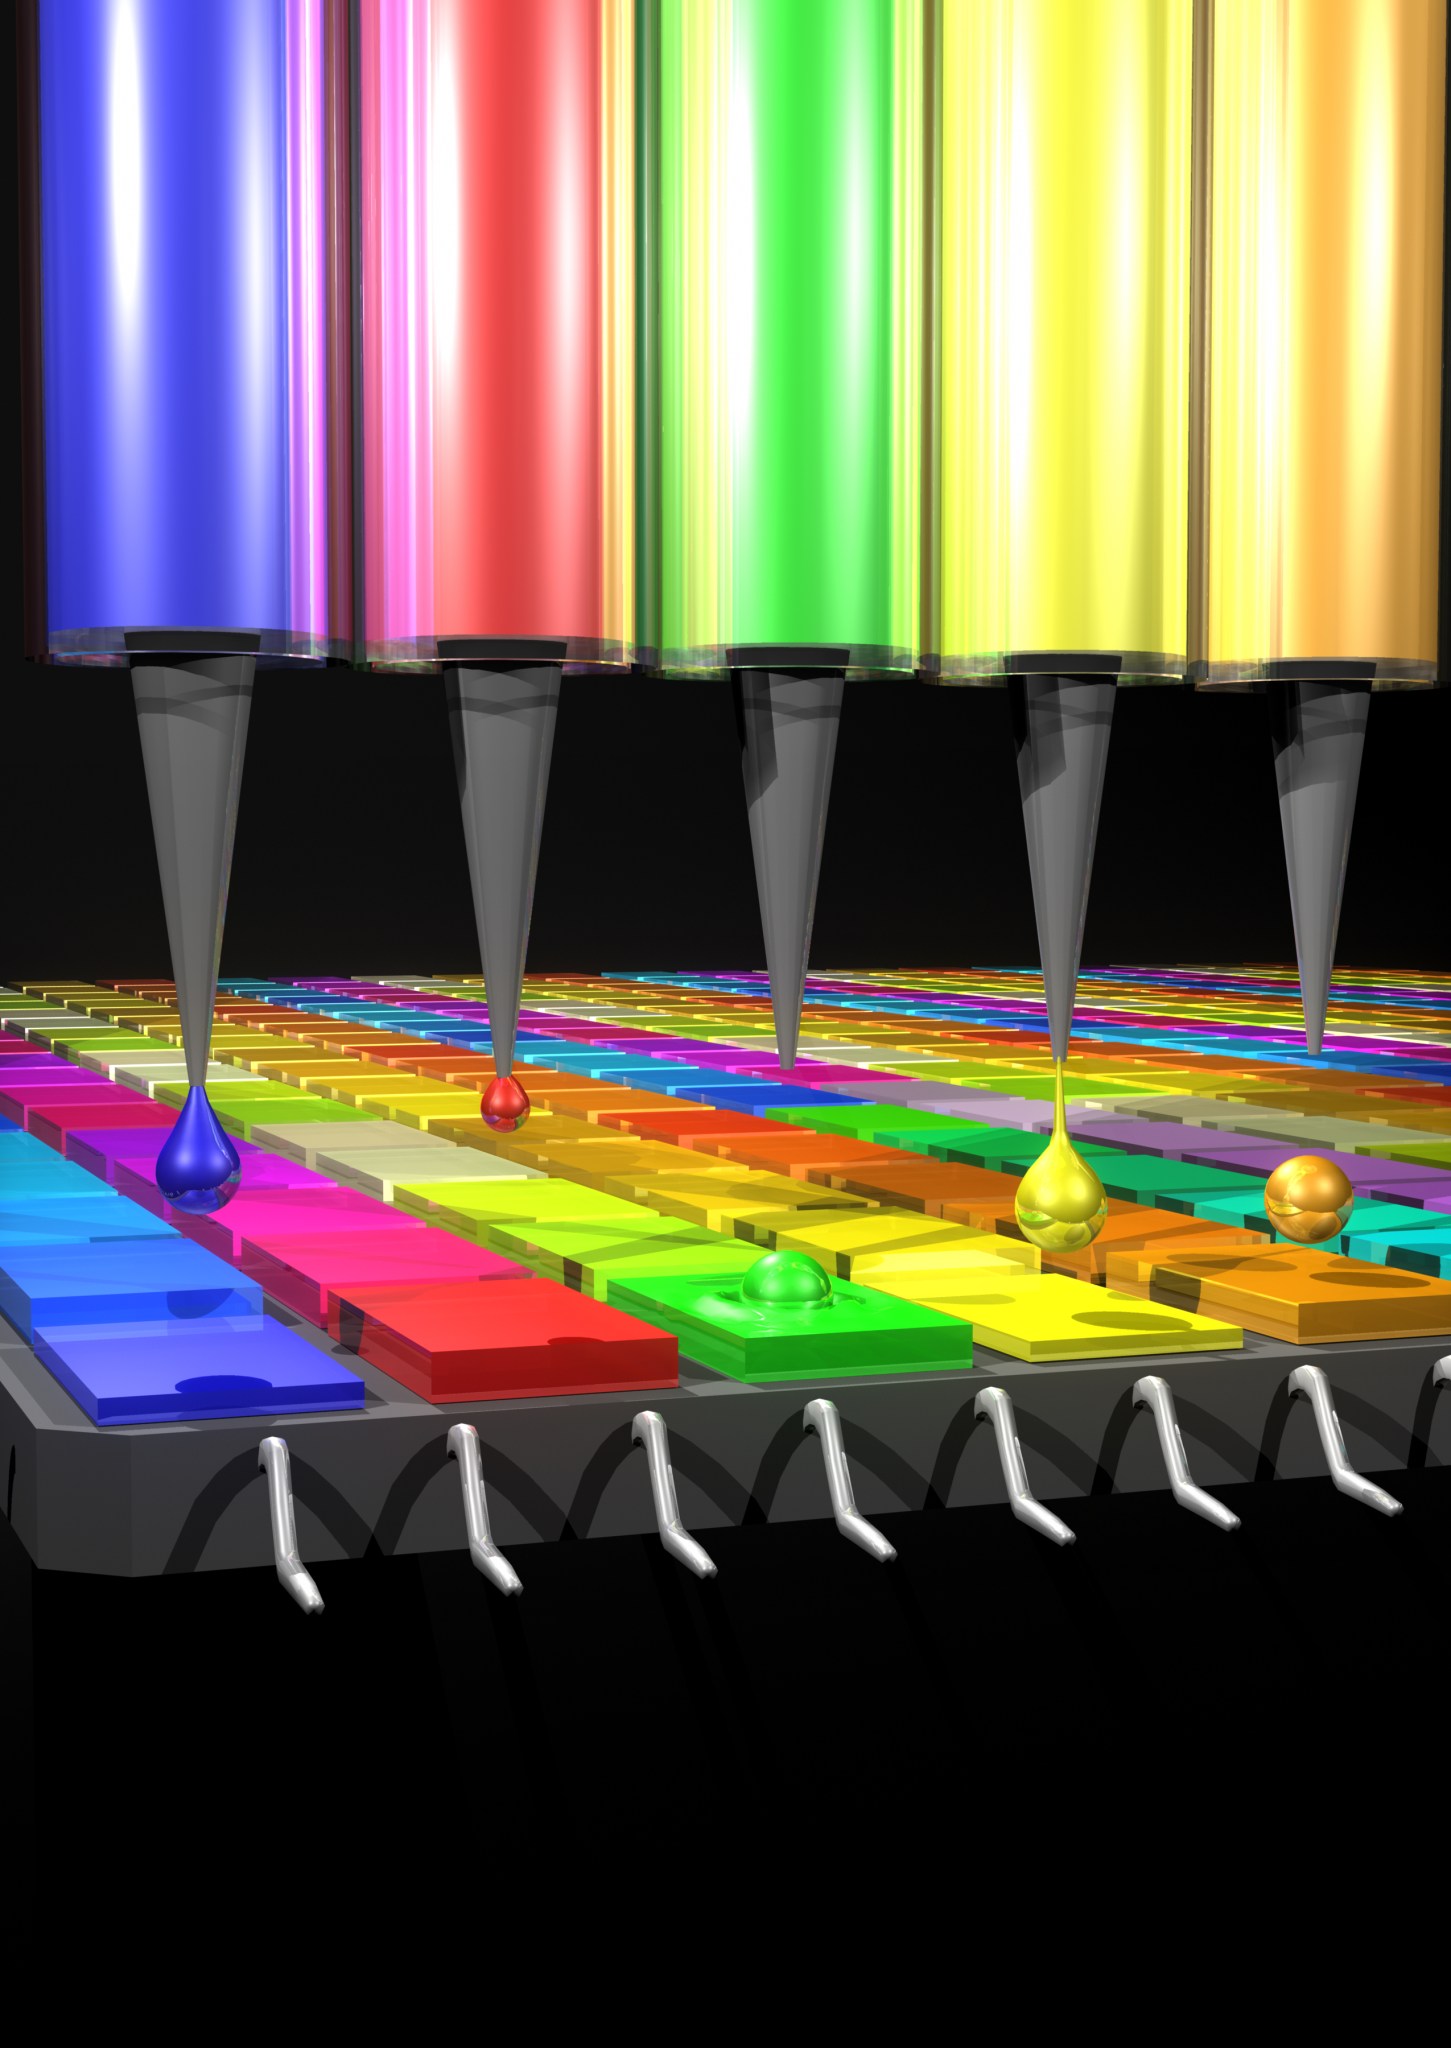 Making silicon devices responsive to infrared light, MIT News